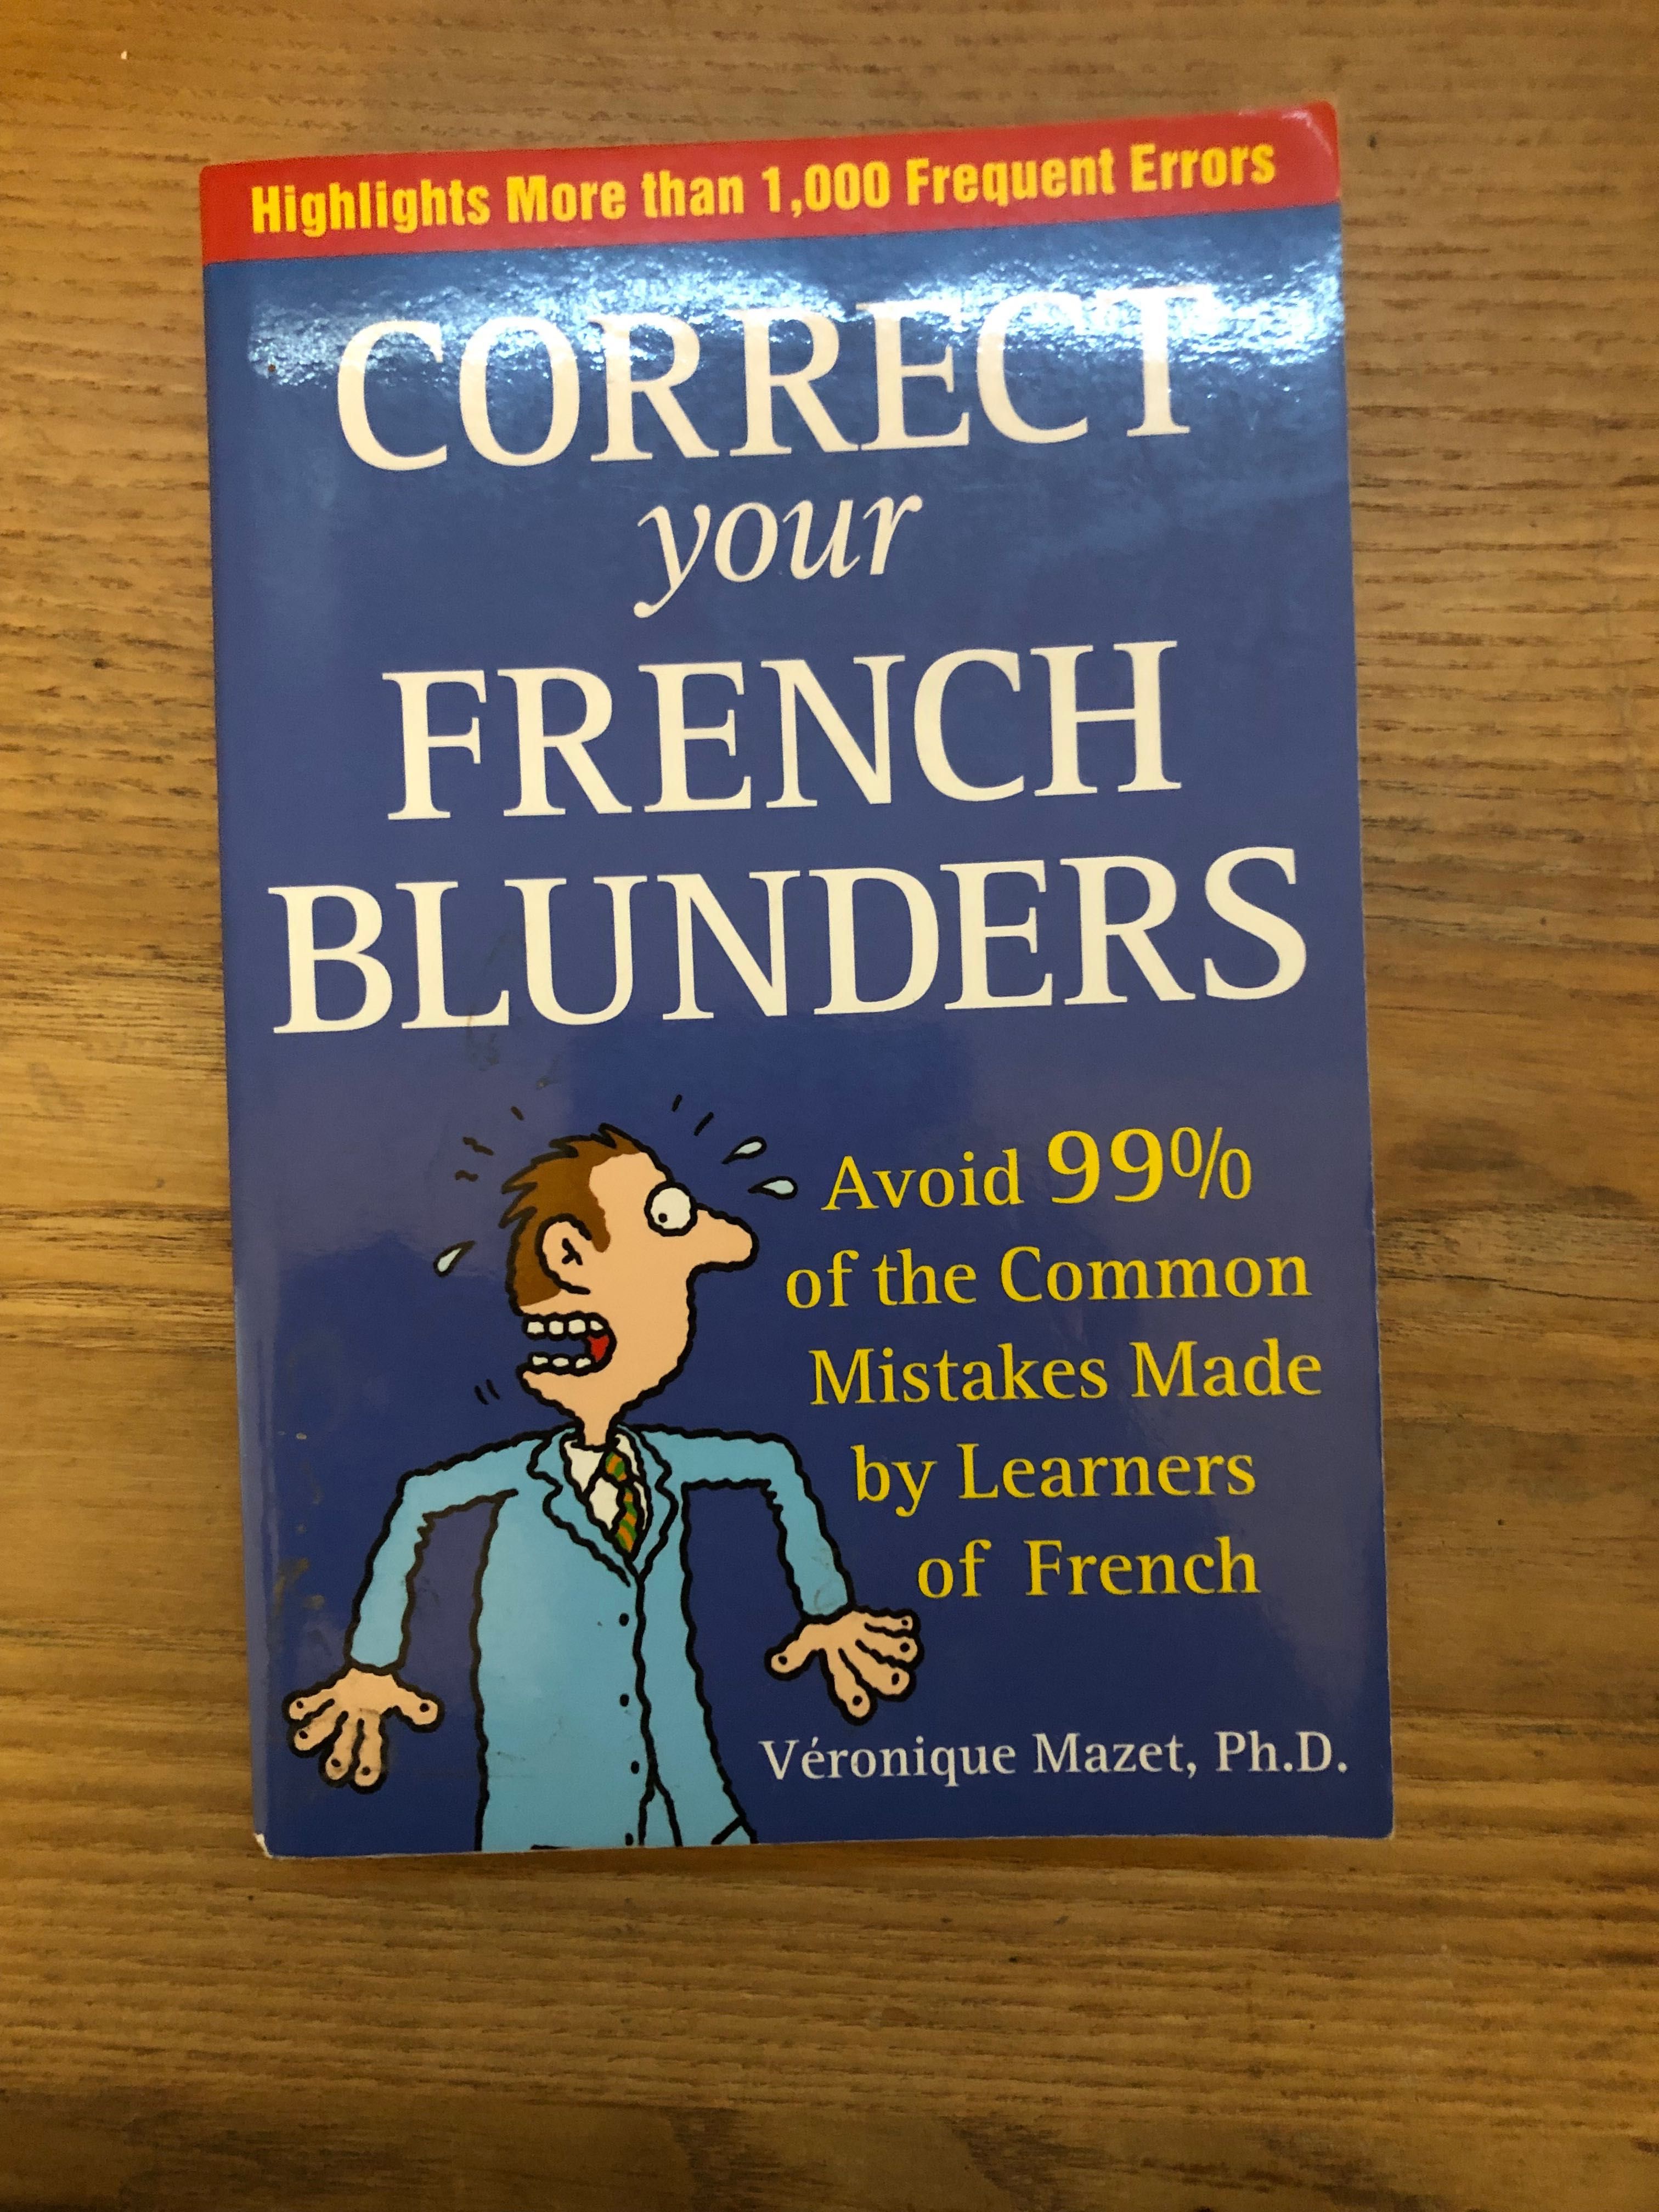 Correct Your French Blunders
Autor: 
Mazet Vronique